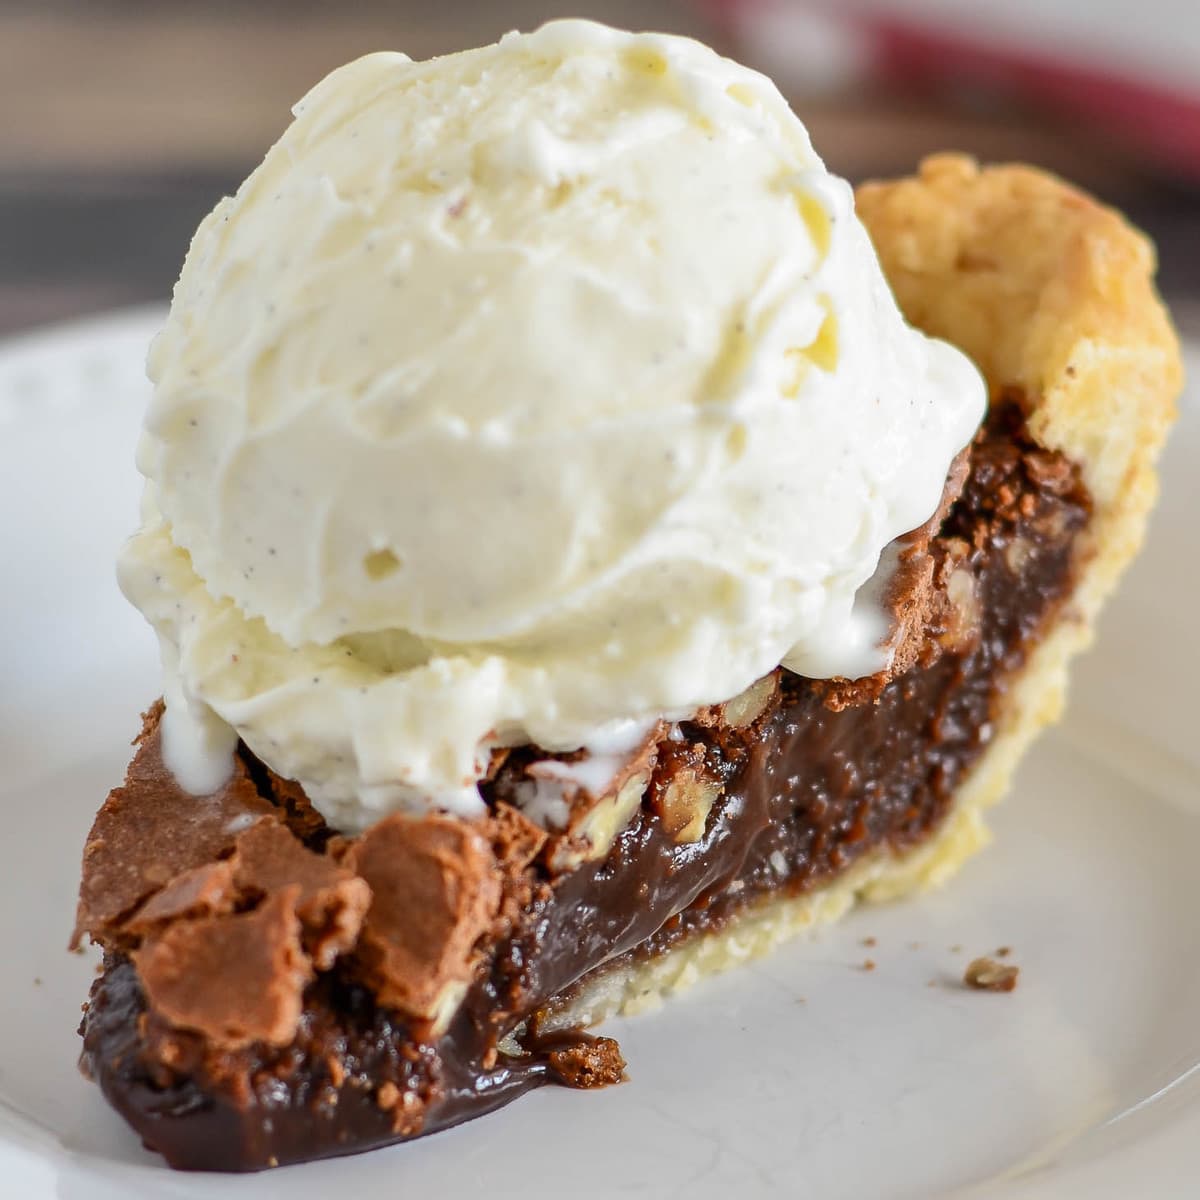 Thanksgiving desserts - a slice of chocolate pecan pie on a white plate.